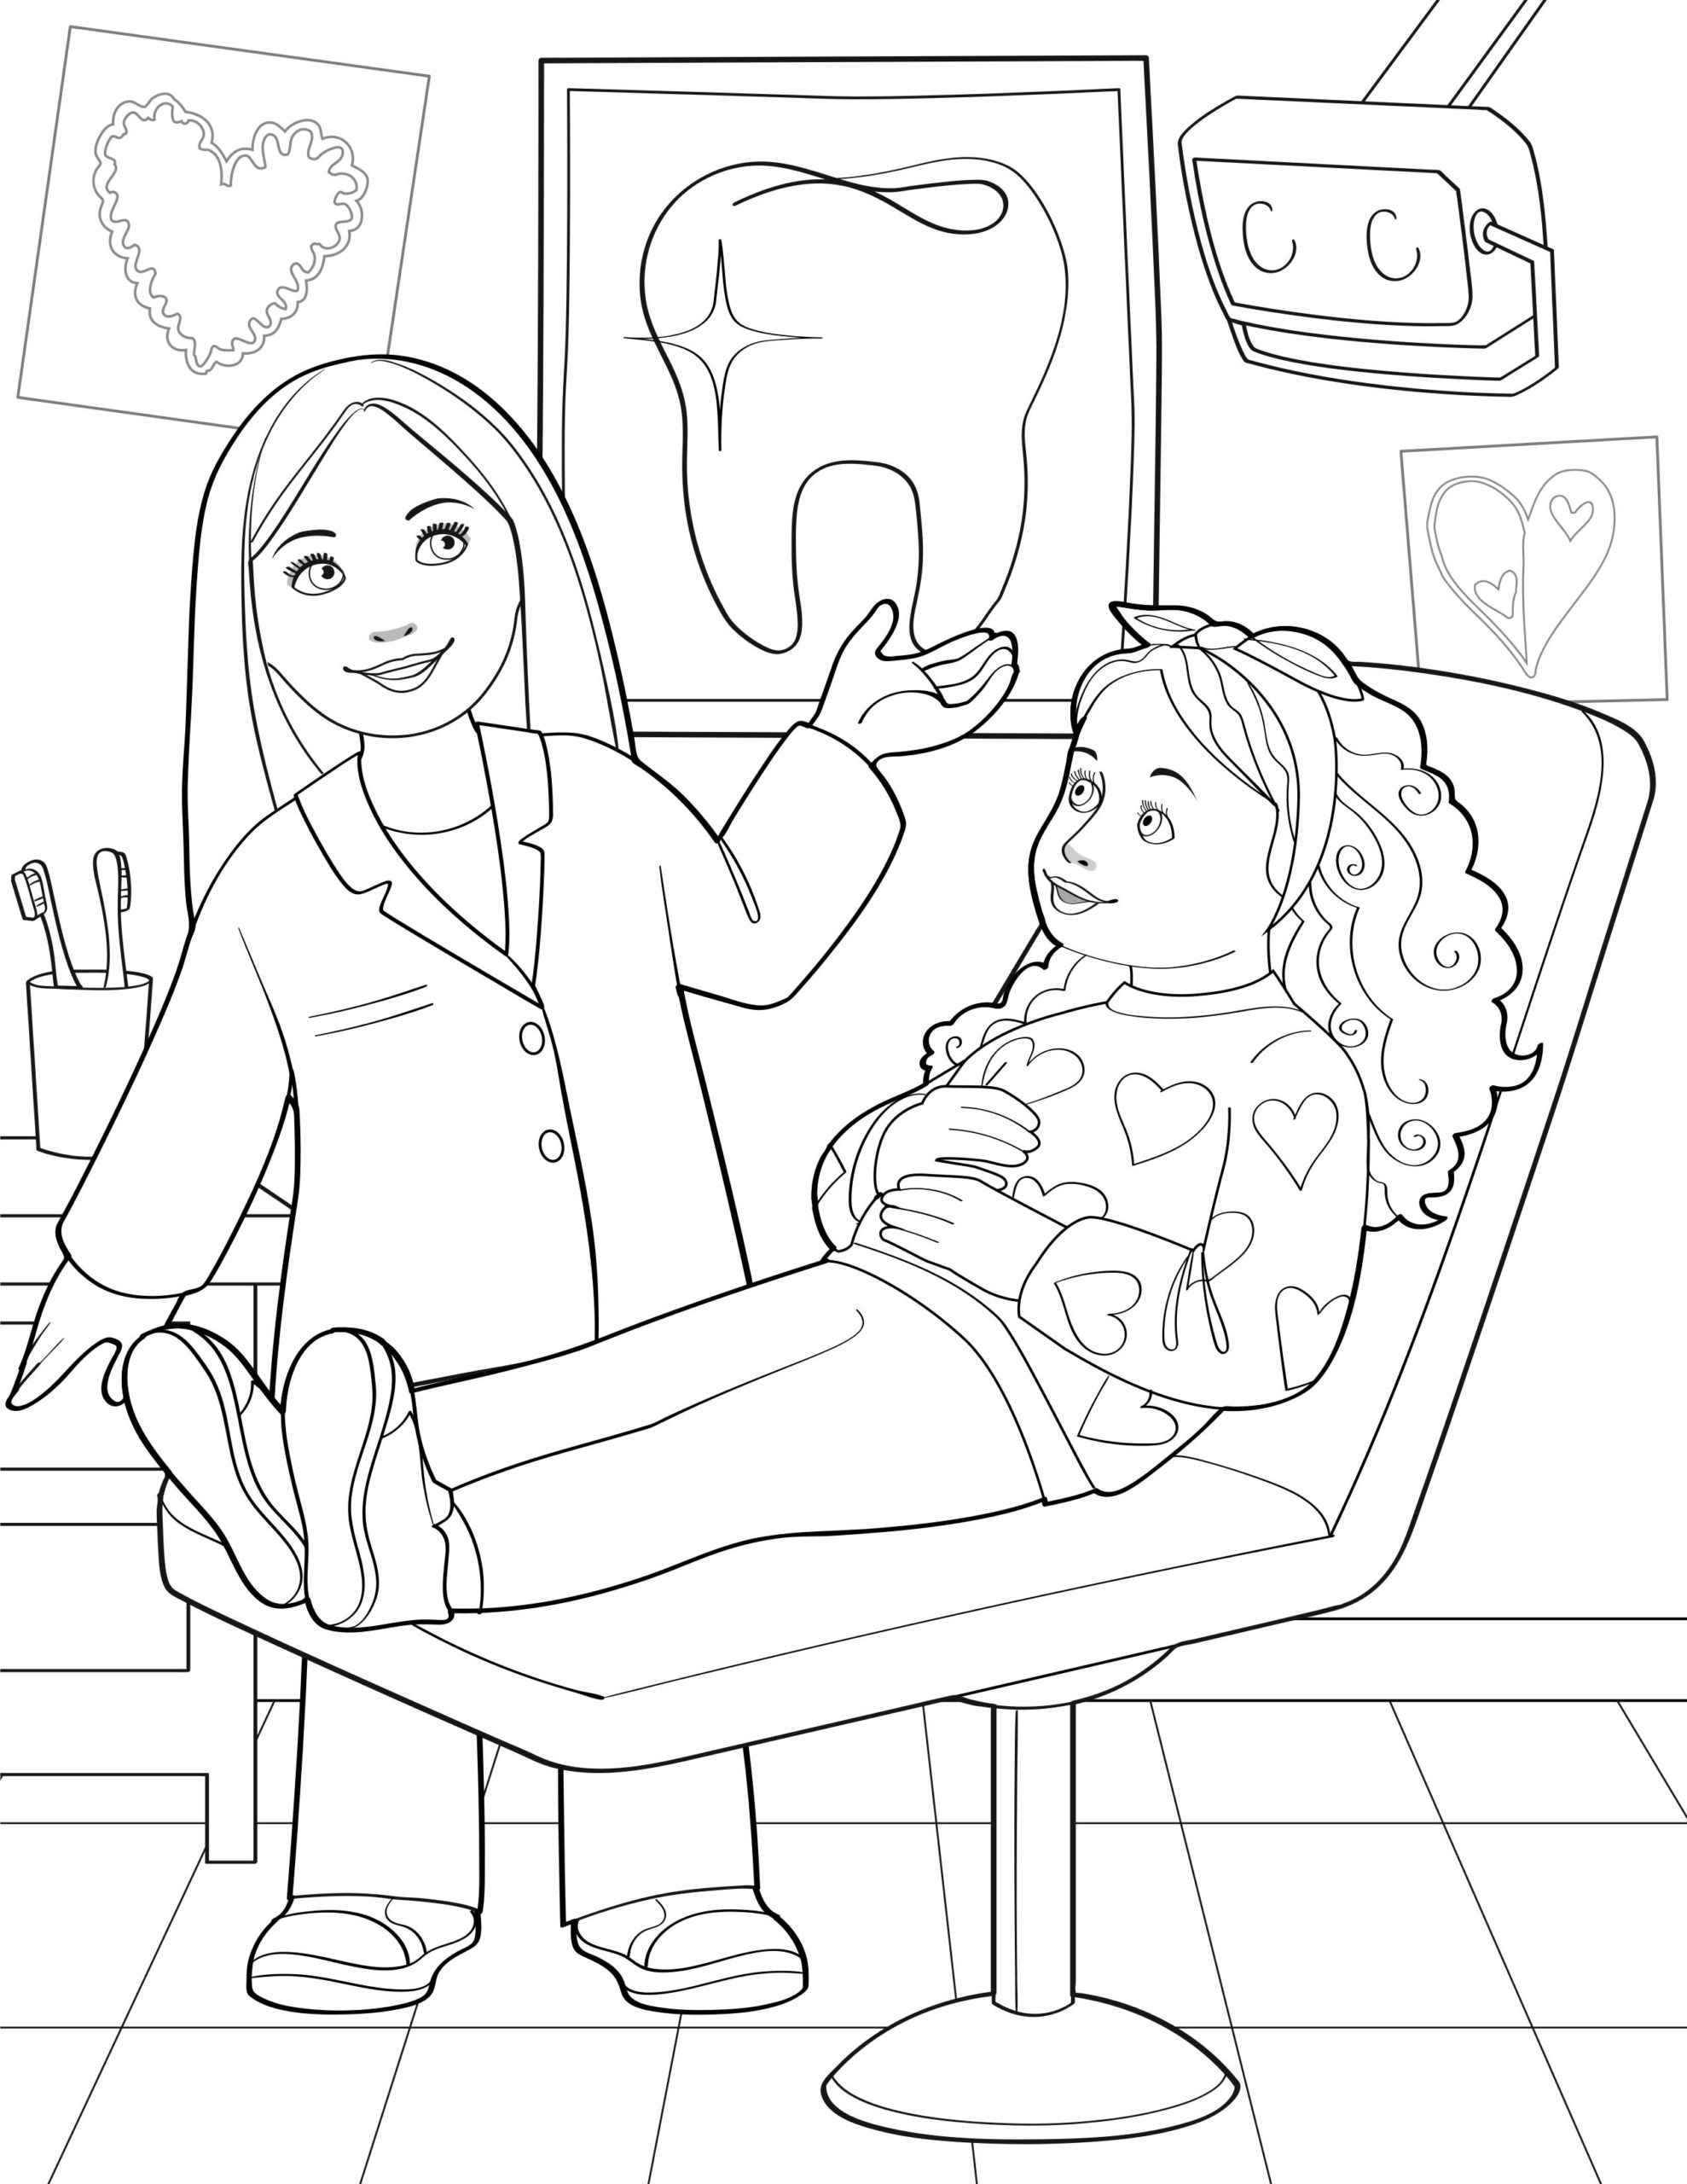 https://ourgeneration.com/wp-content/uploads/OurGeneration-ColoringSheet-DentistVisit-scaled.jpg